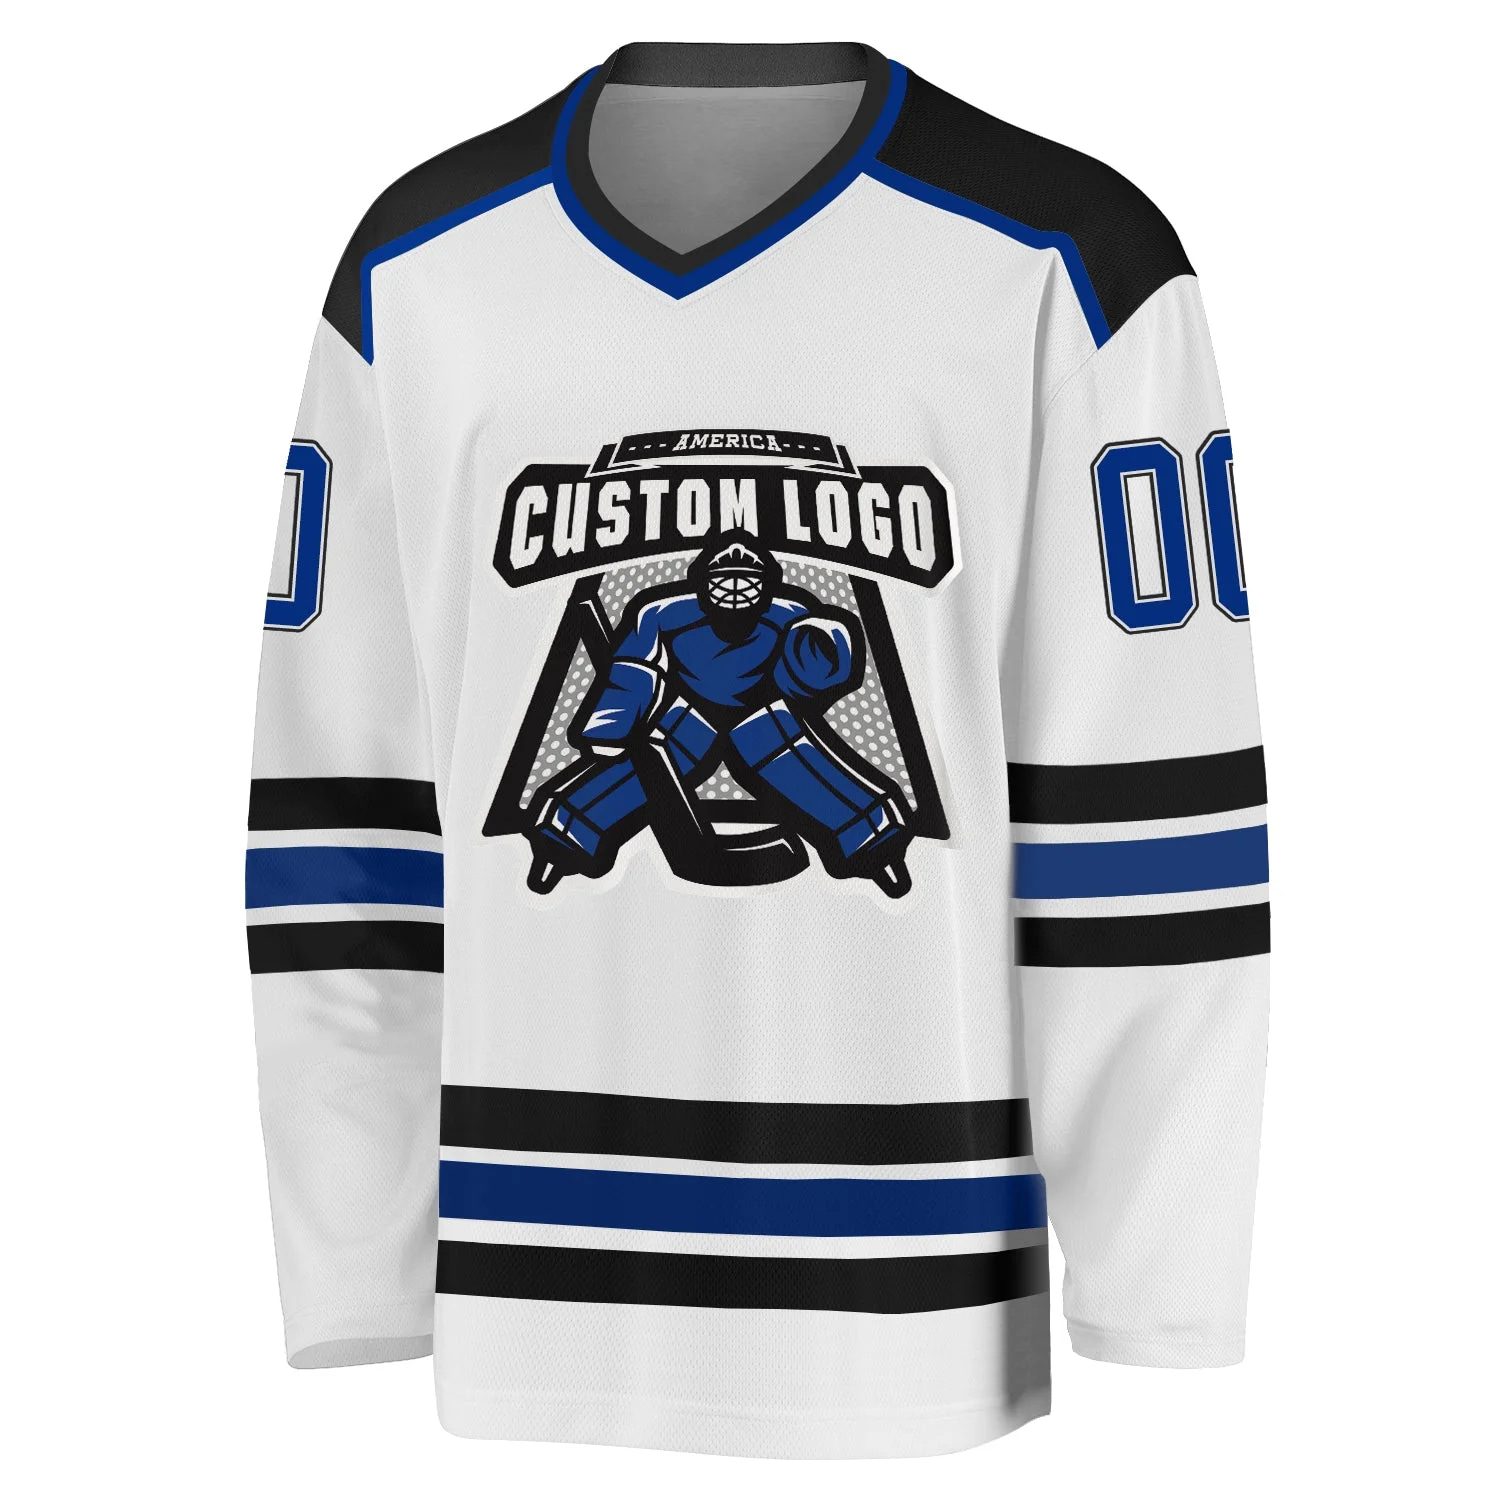 Inktee Store - Stitched And Print White Royal-Black Hockey Jersey Custom Image